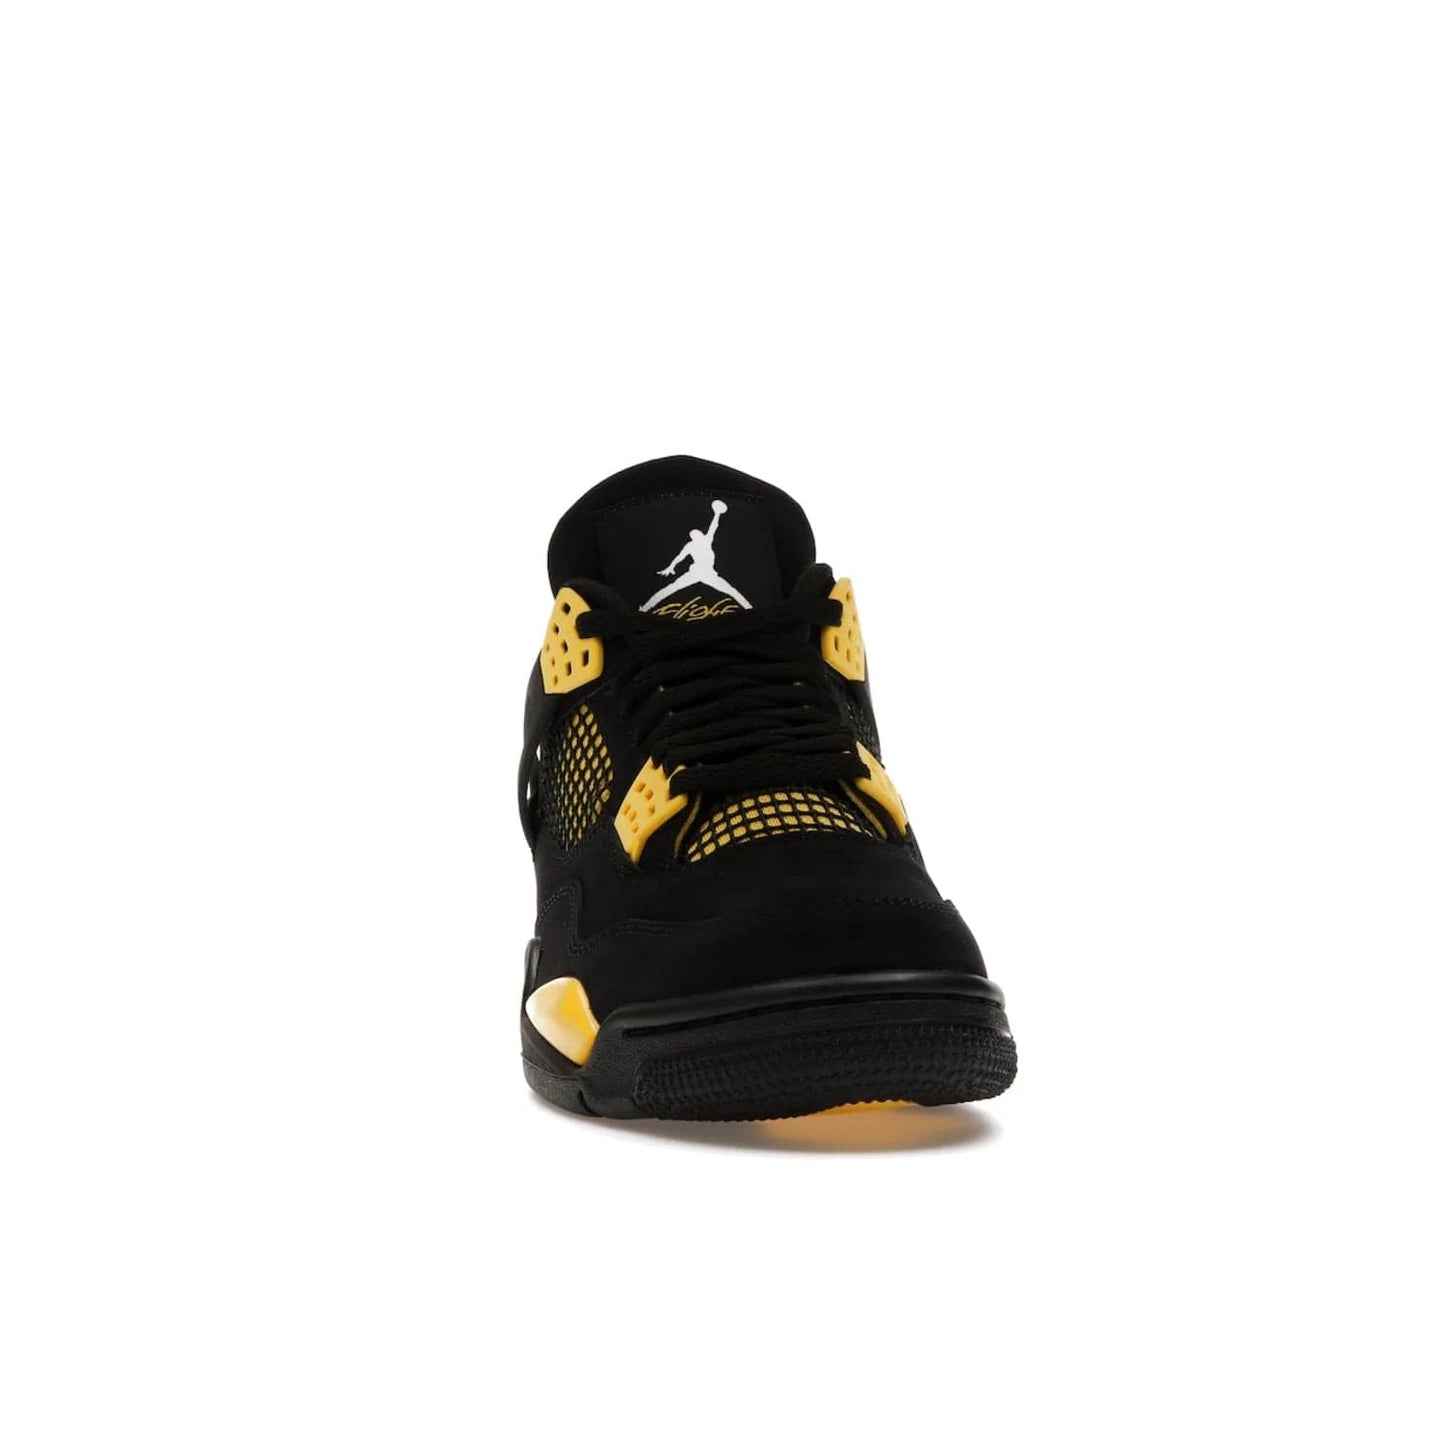 Jordan 4 Retro Thunder (2023) - Image 9 - Only at www.BallersClubKickz.com - Iconic Air Jordan 4 Retro Thunder (2023) returns with black nubuck upper and Tour Yellow details. Featuring Jumpman logo on heel tab, tongue and insoles. Dropping May 13th, 2023.